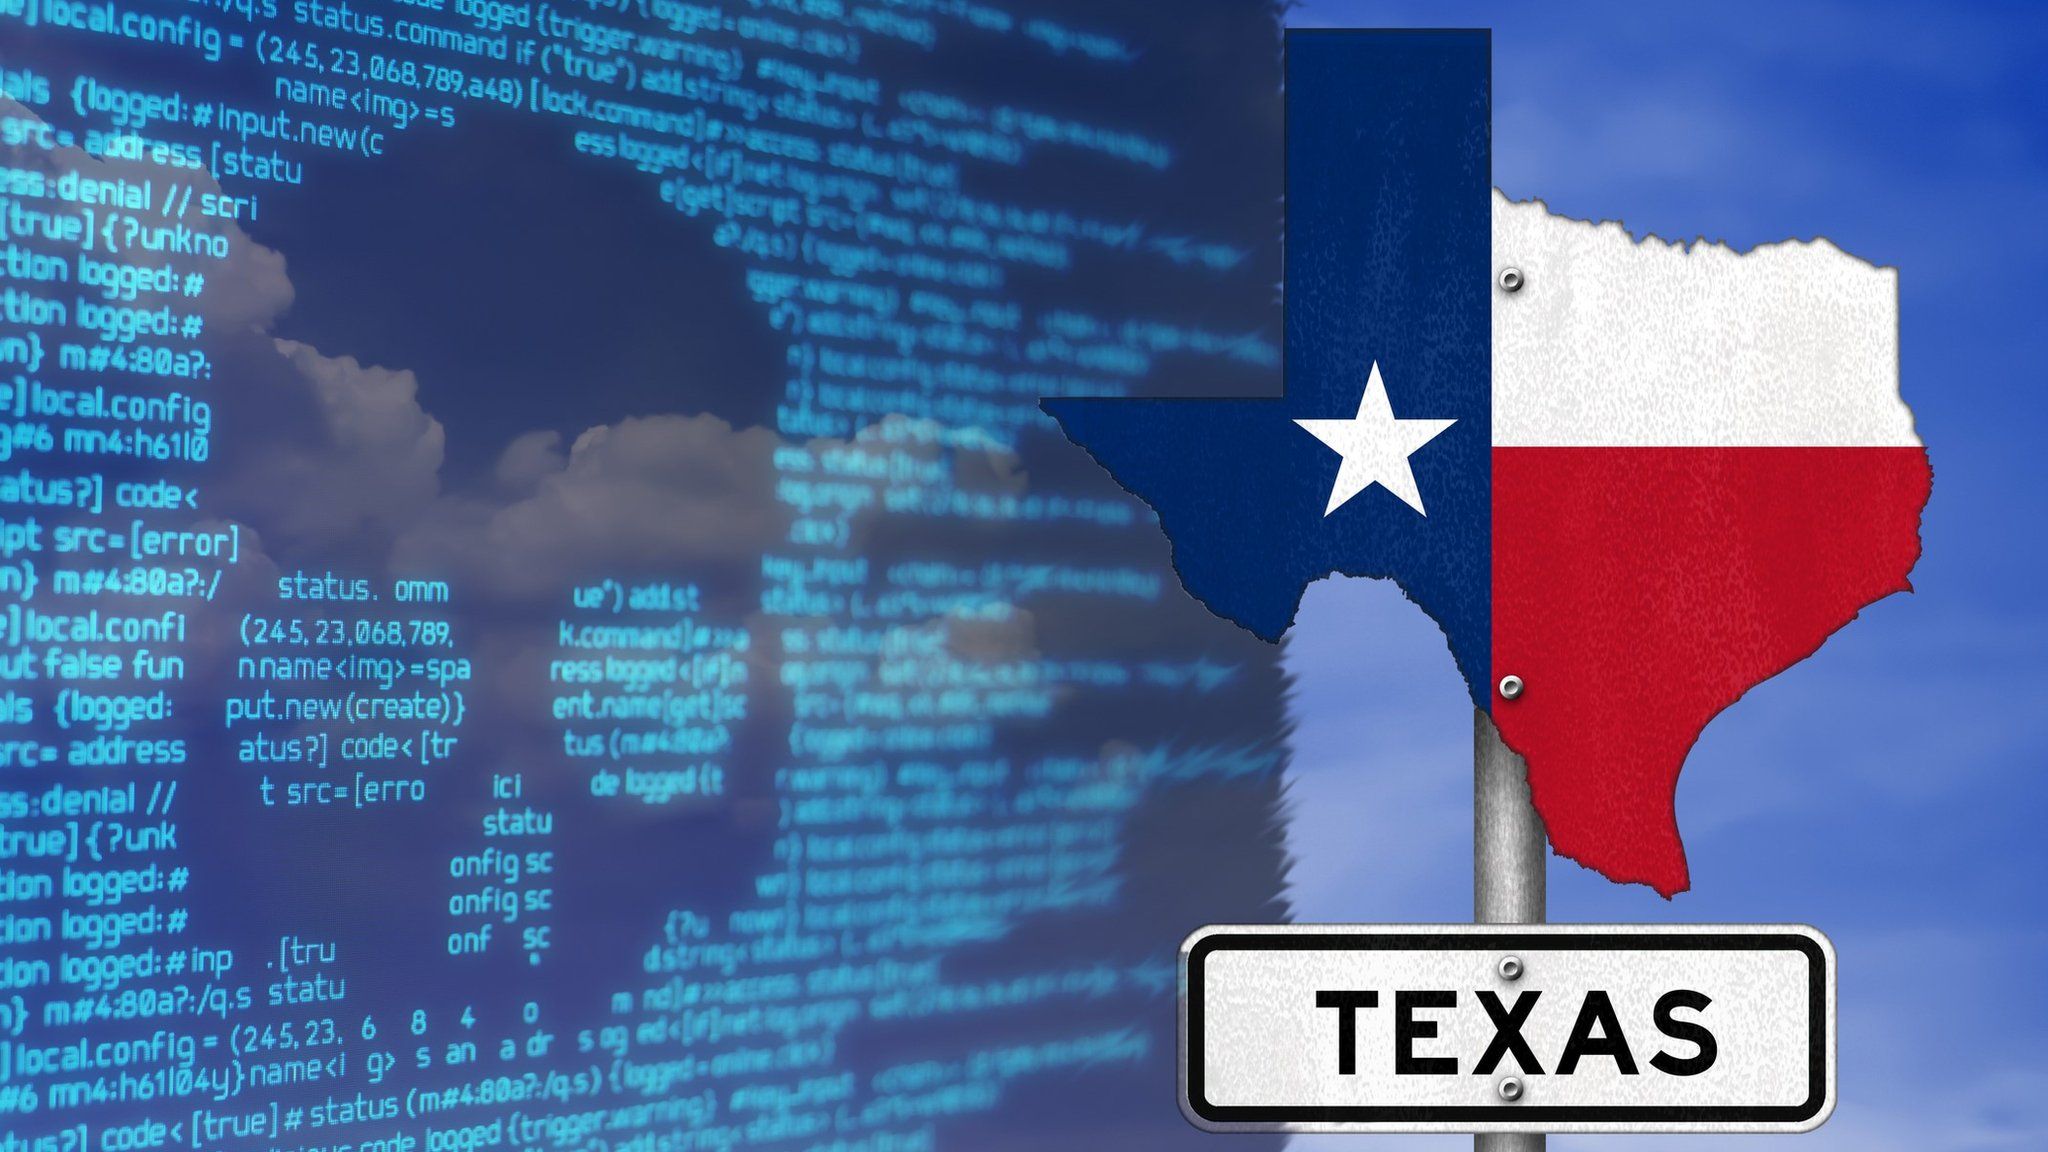 Screen of ransomware graphics and Texas flag